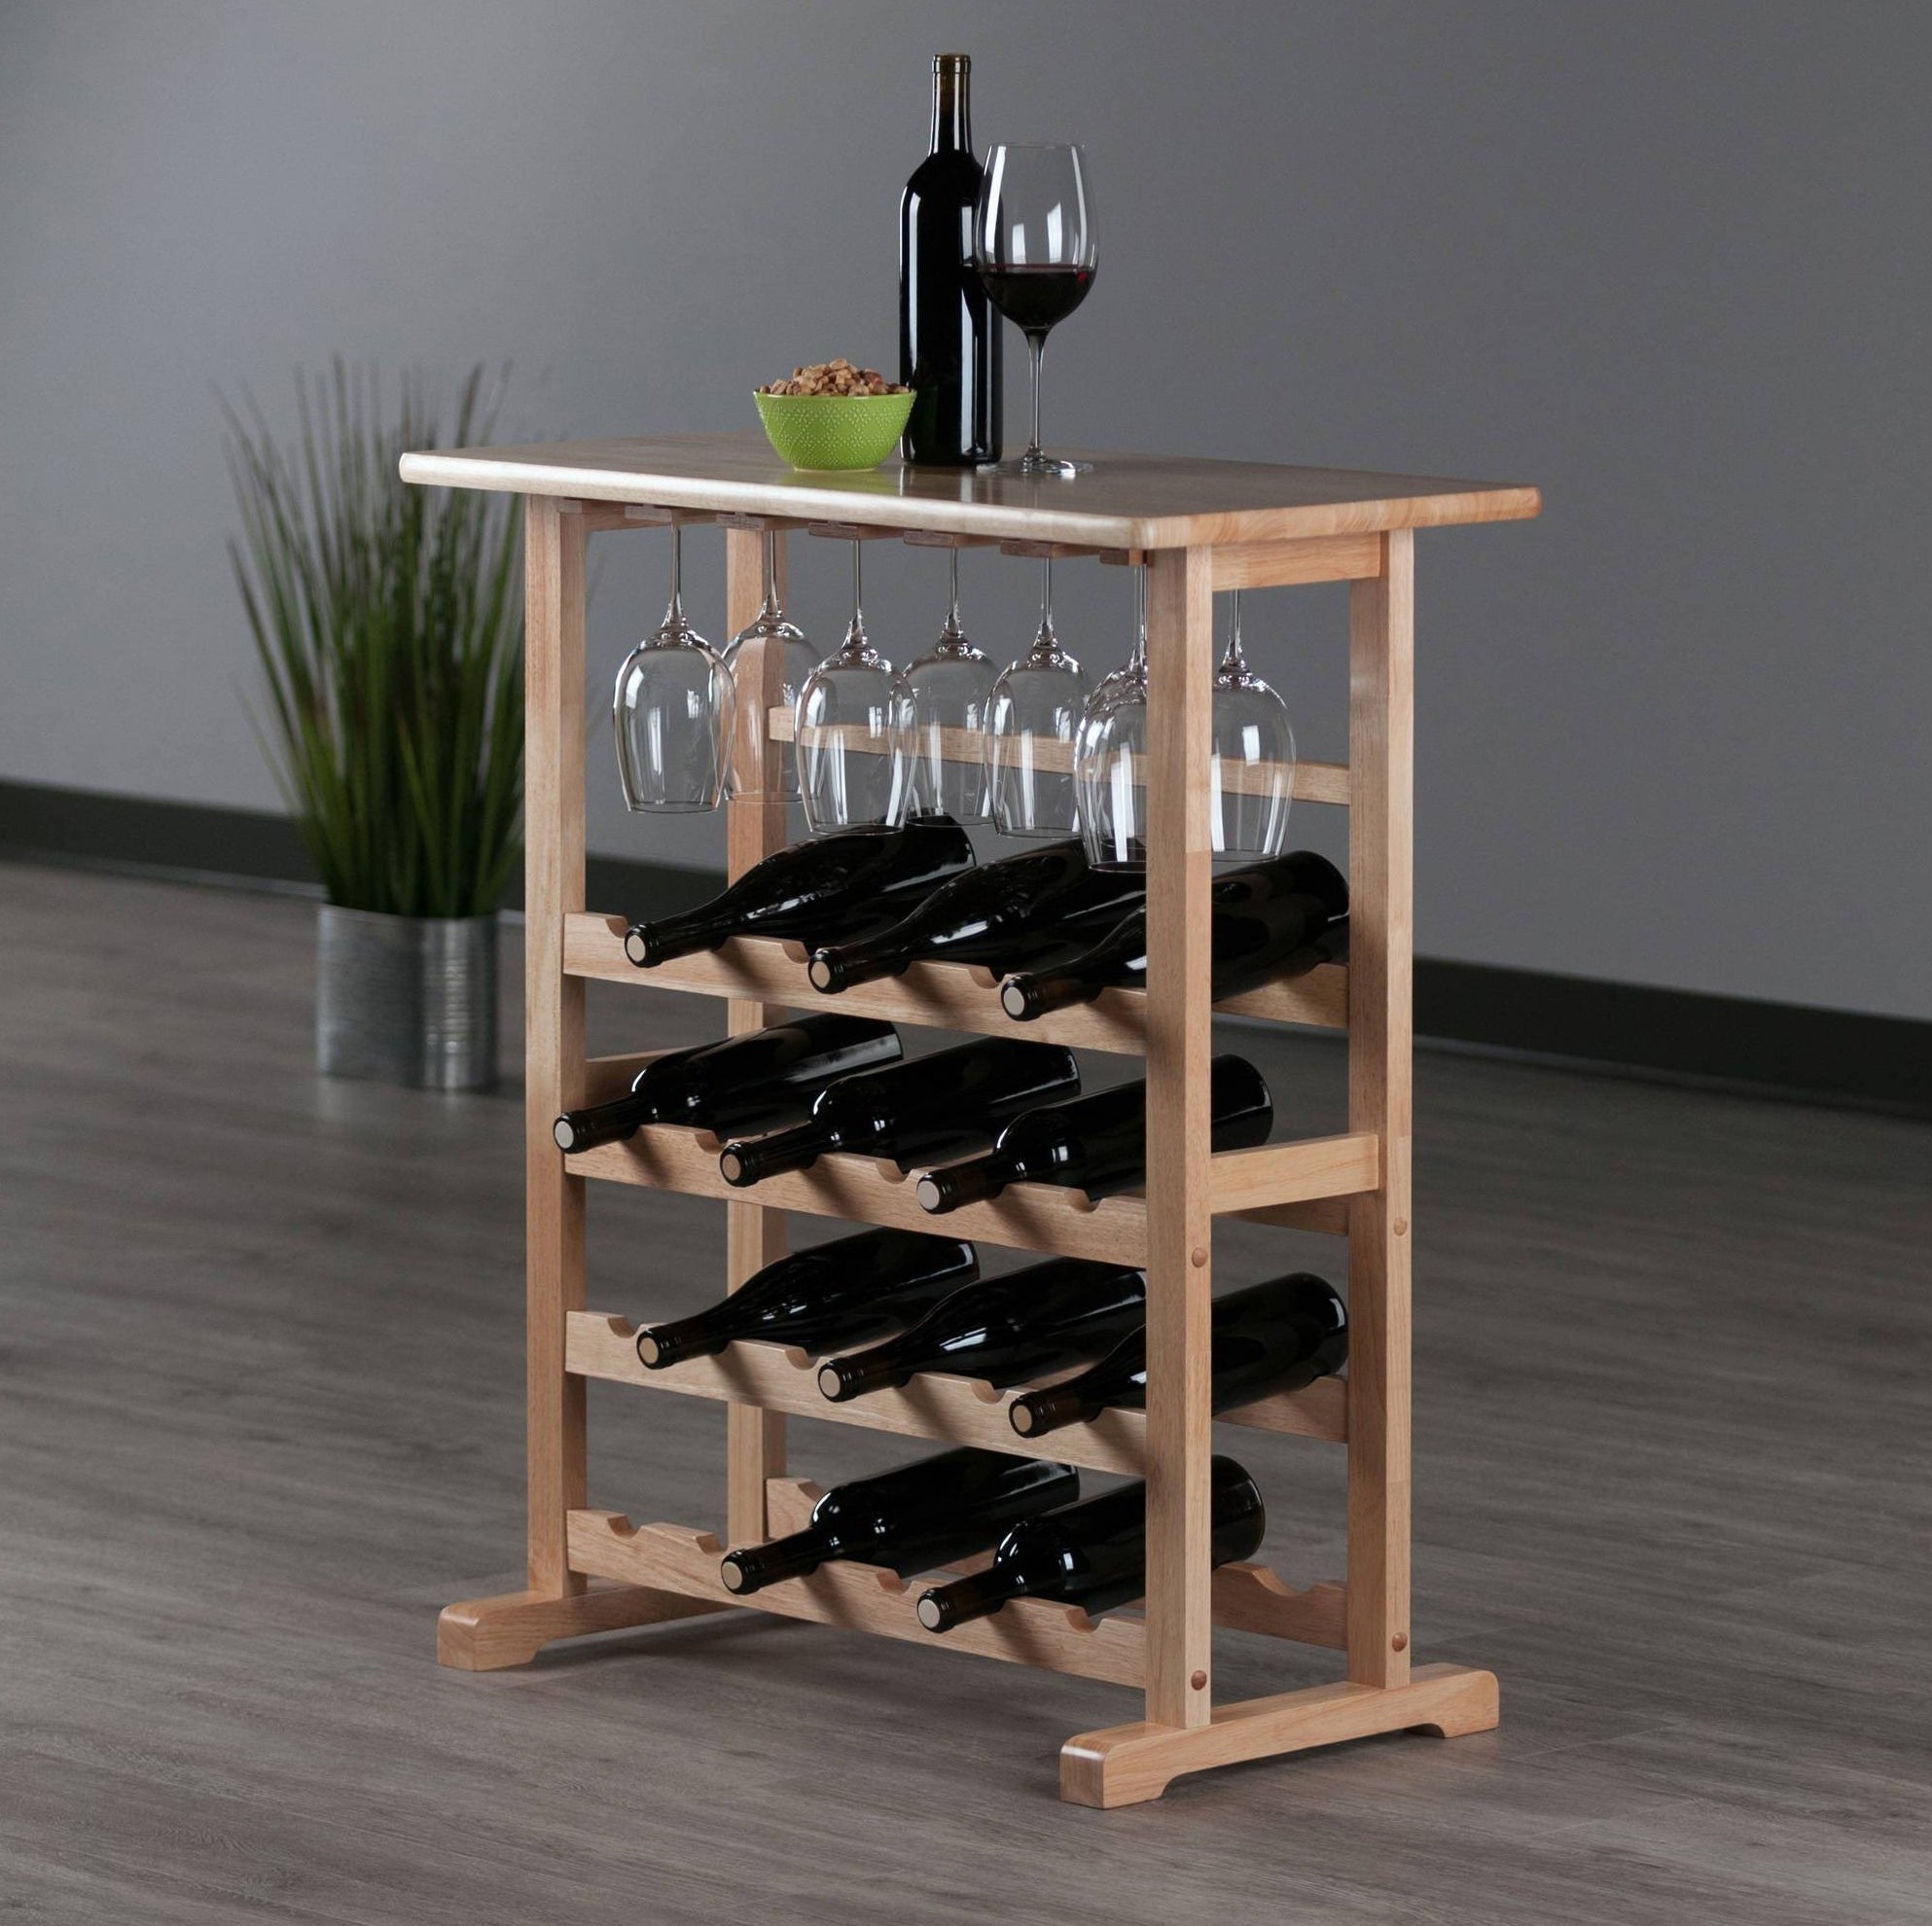 the wooden wine rack shelf with bottles and glasses displayed